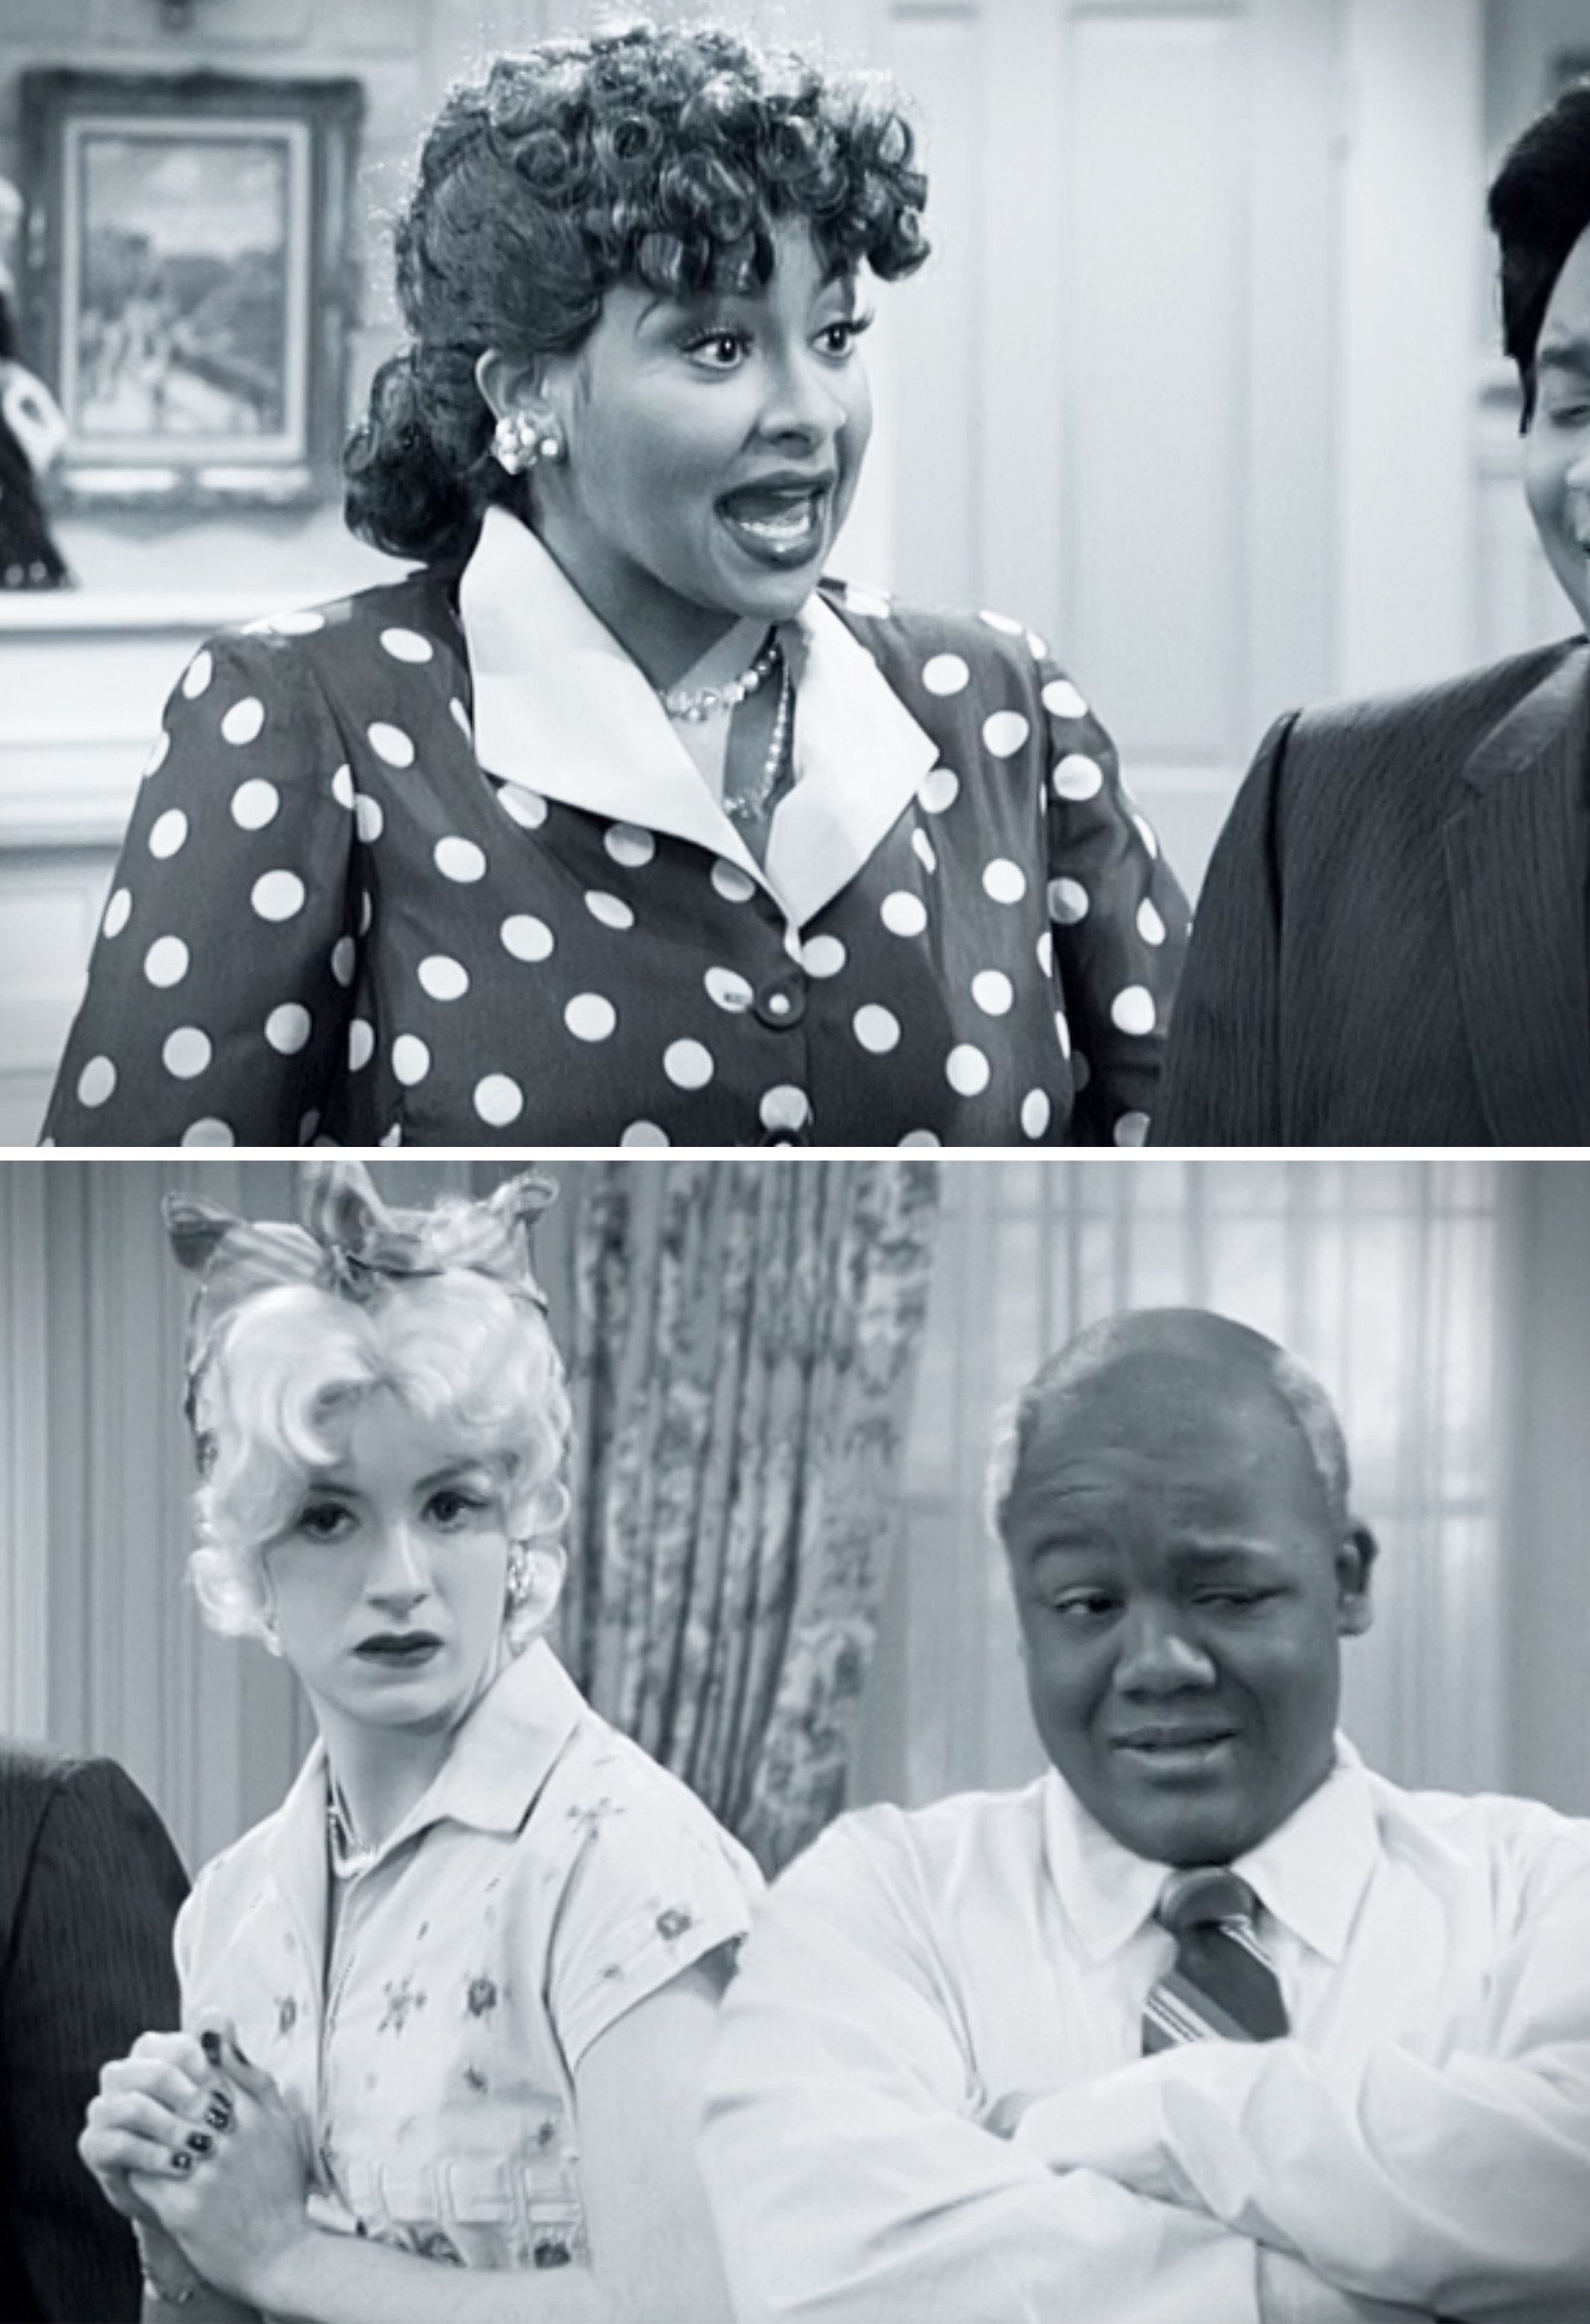 raven and the cast dressed up as i love lucy characters